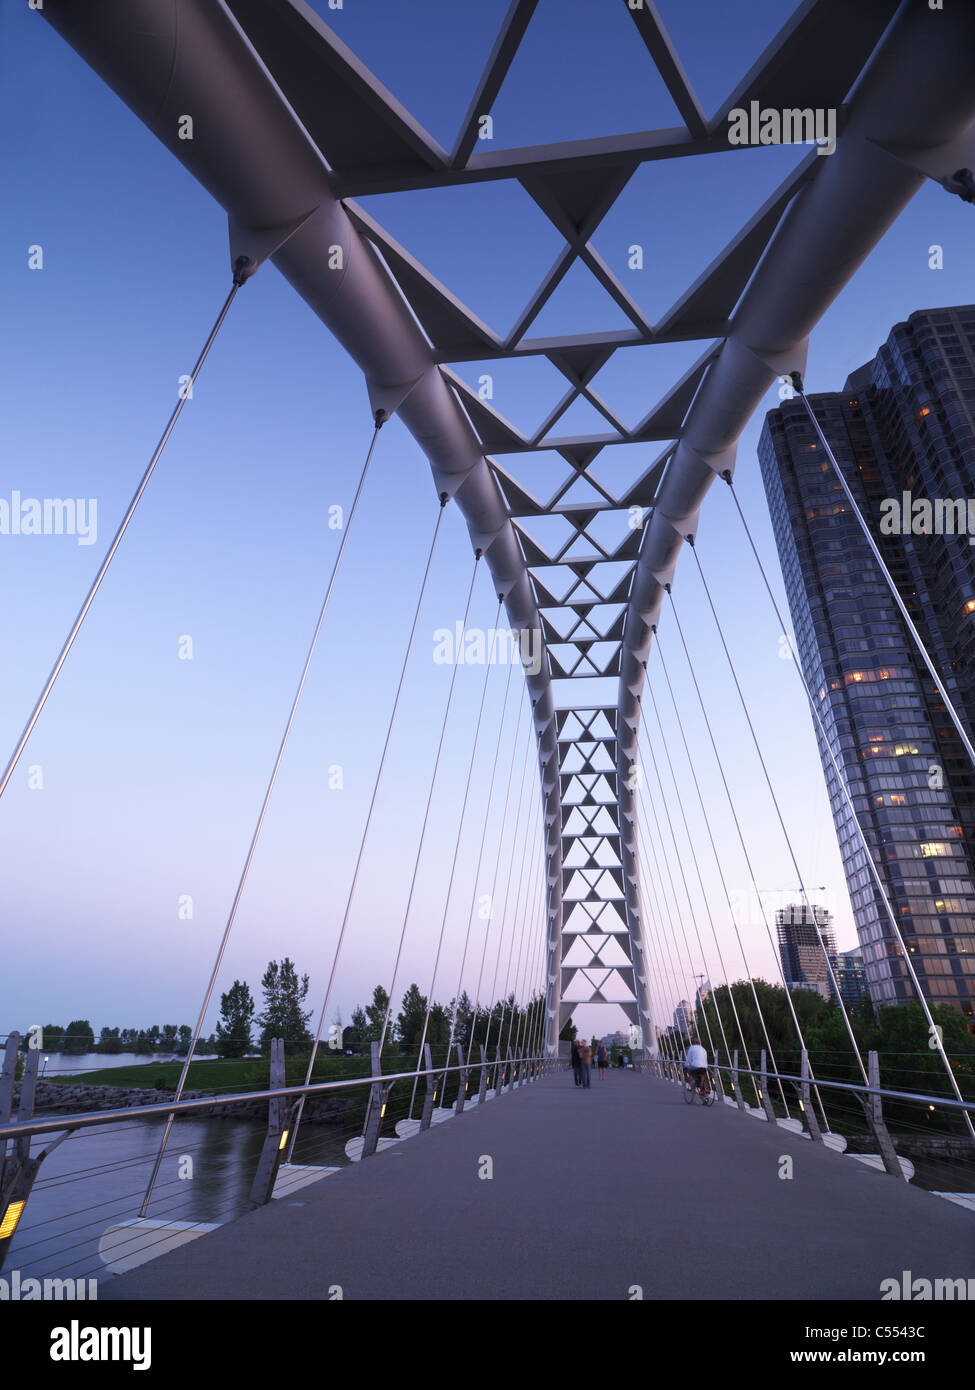 License available at MaximImages.com The Humber River Arch Bridge in Toronto during sunset also known as the Humber Bay Gateway Bridge. Canada Stock Photo